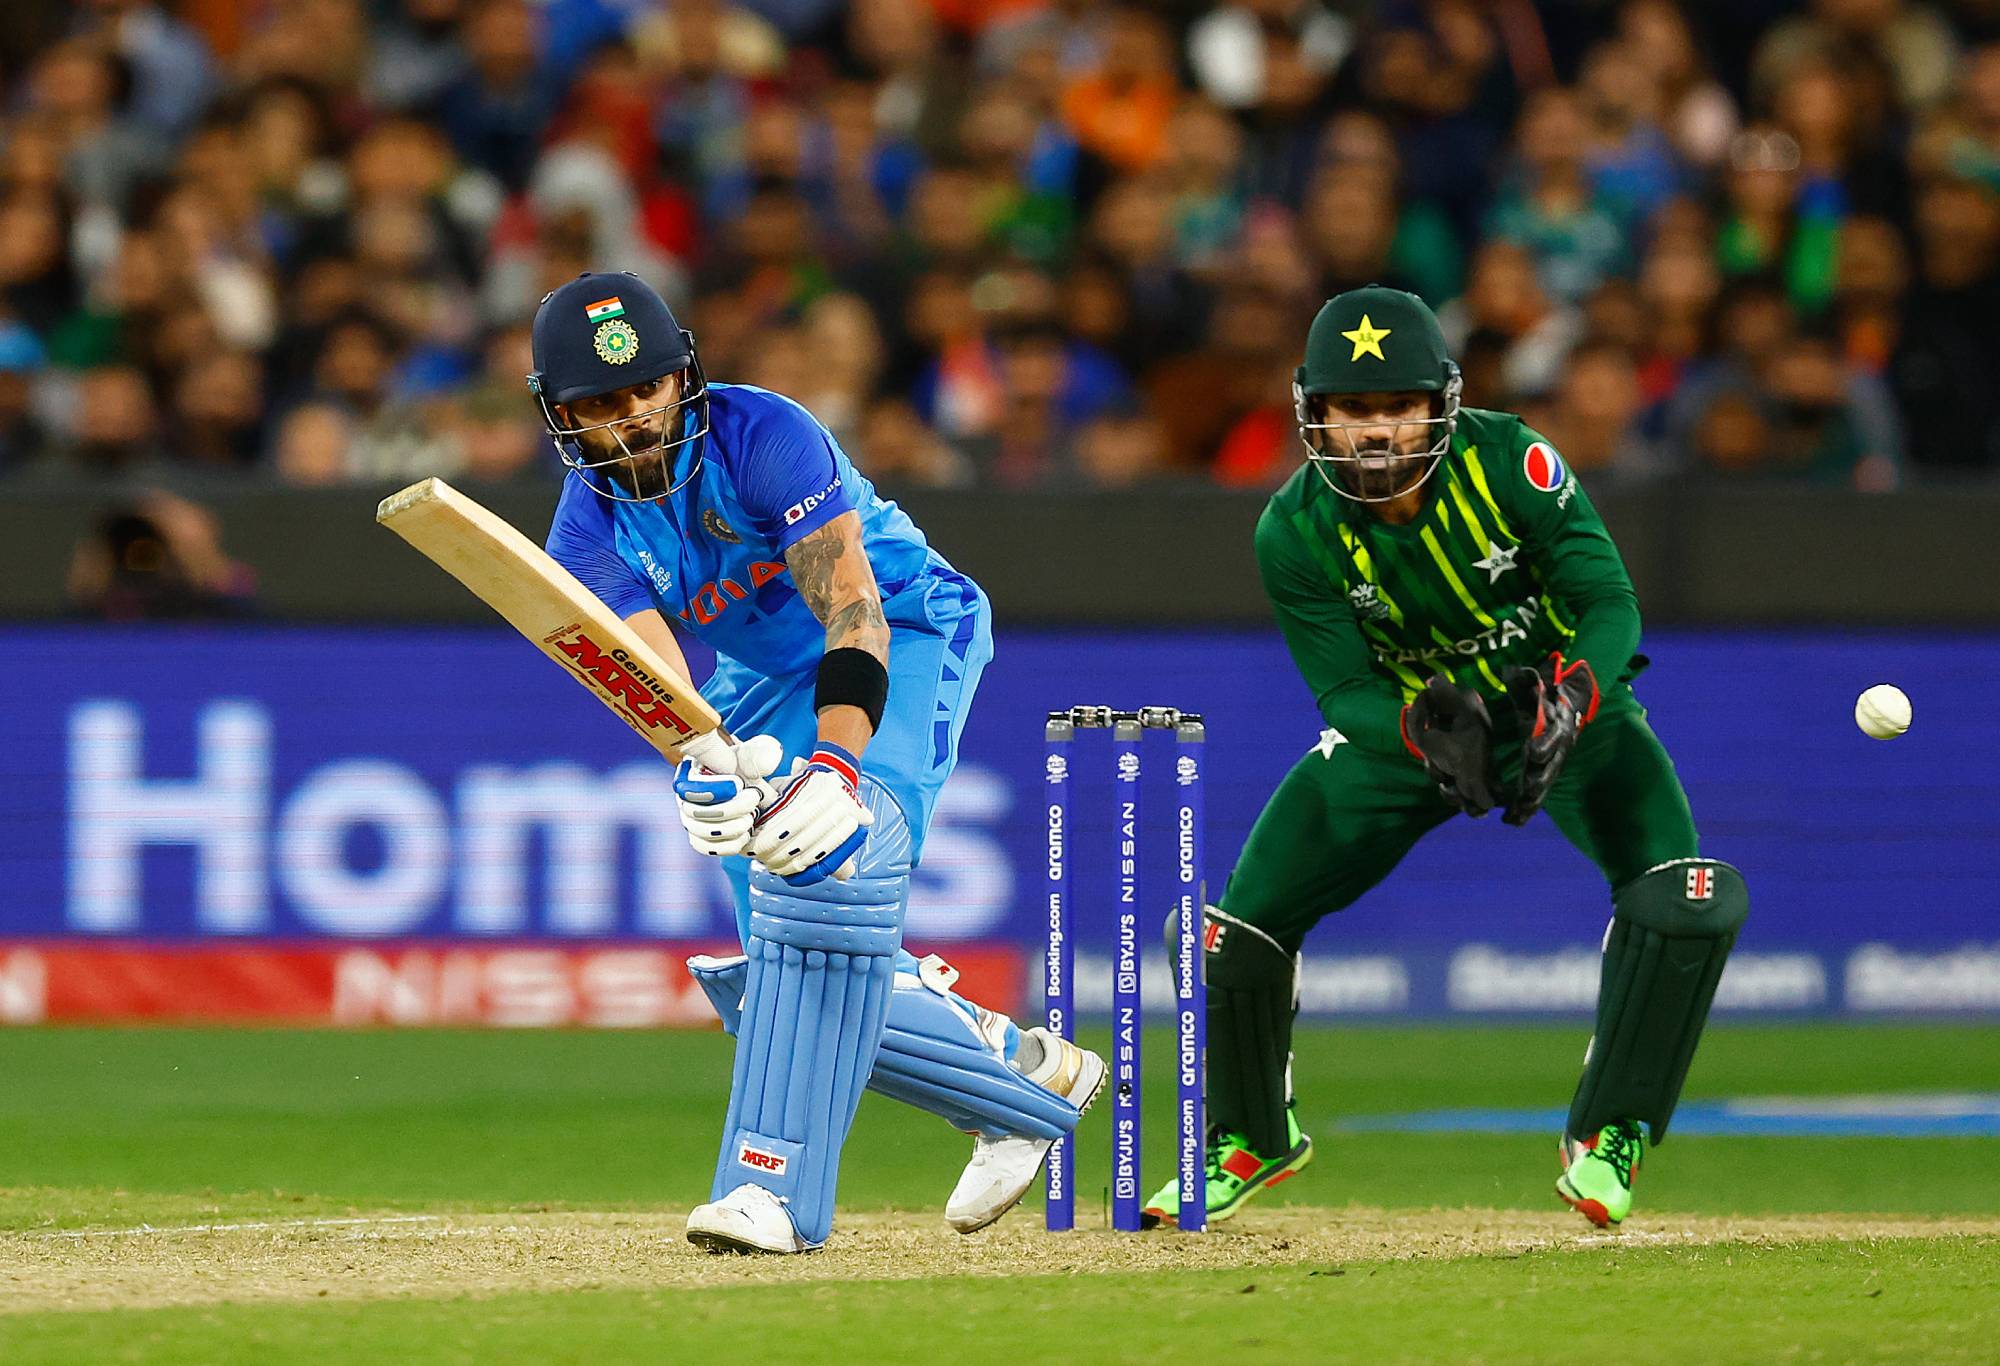 MELBOURNE, AUSTRALIA - OCTOBER 23: Virat Kohli of India bats during the ICC Men's T20 World Cup match between India and Pakistan at Melbourne Cricket Ground on October 23, 2022 in Melbourne, Australia. (Photo by Daniel Pockett-ICC/ICC via Getty Images)